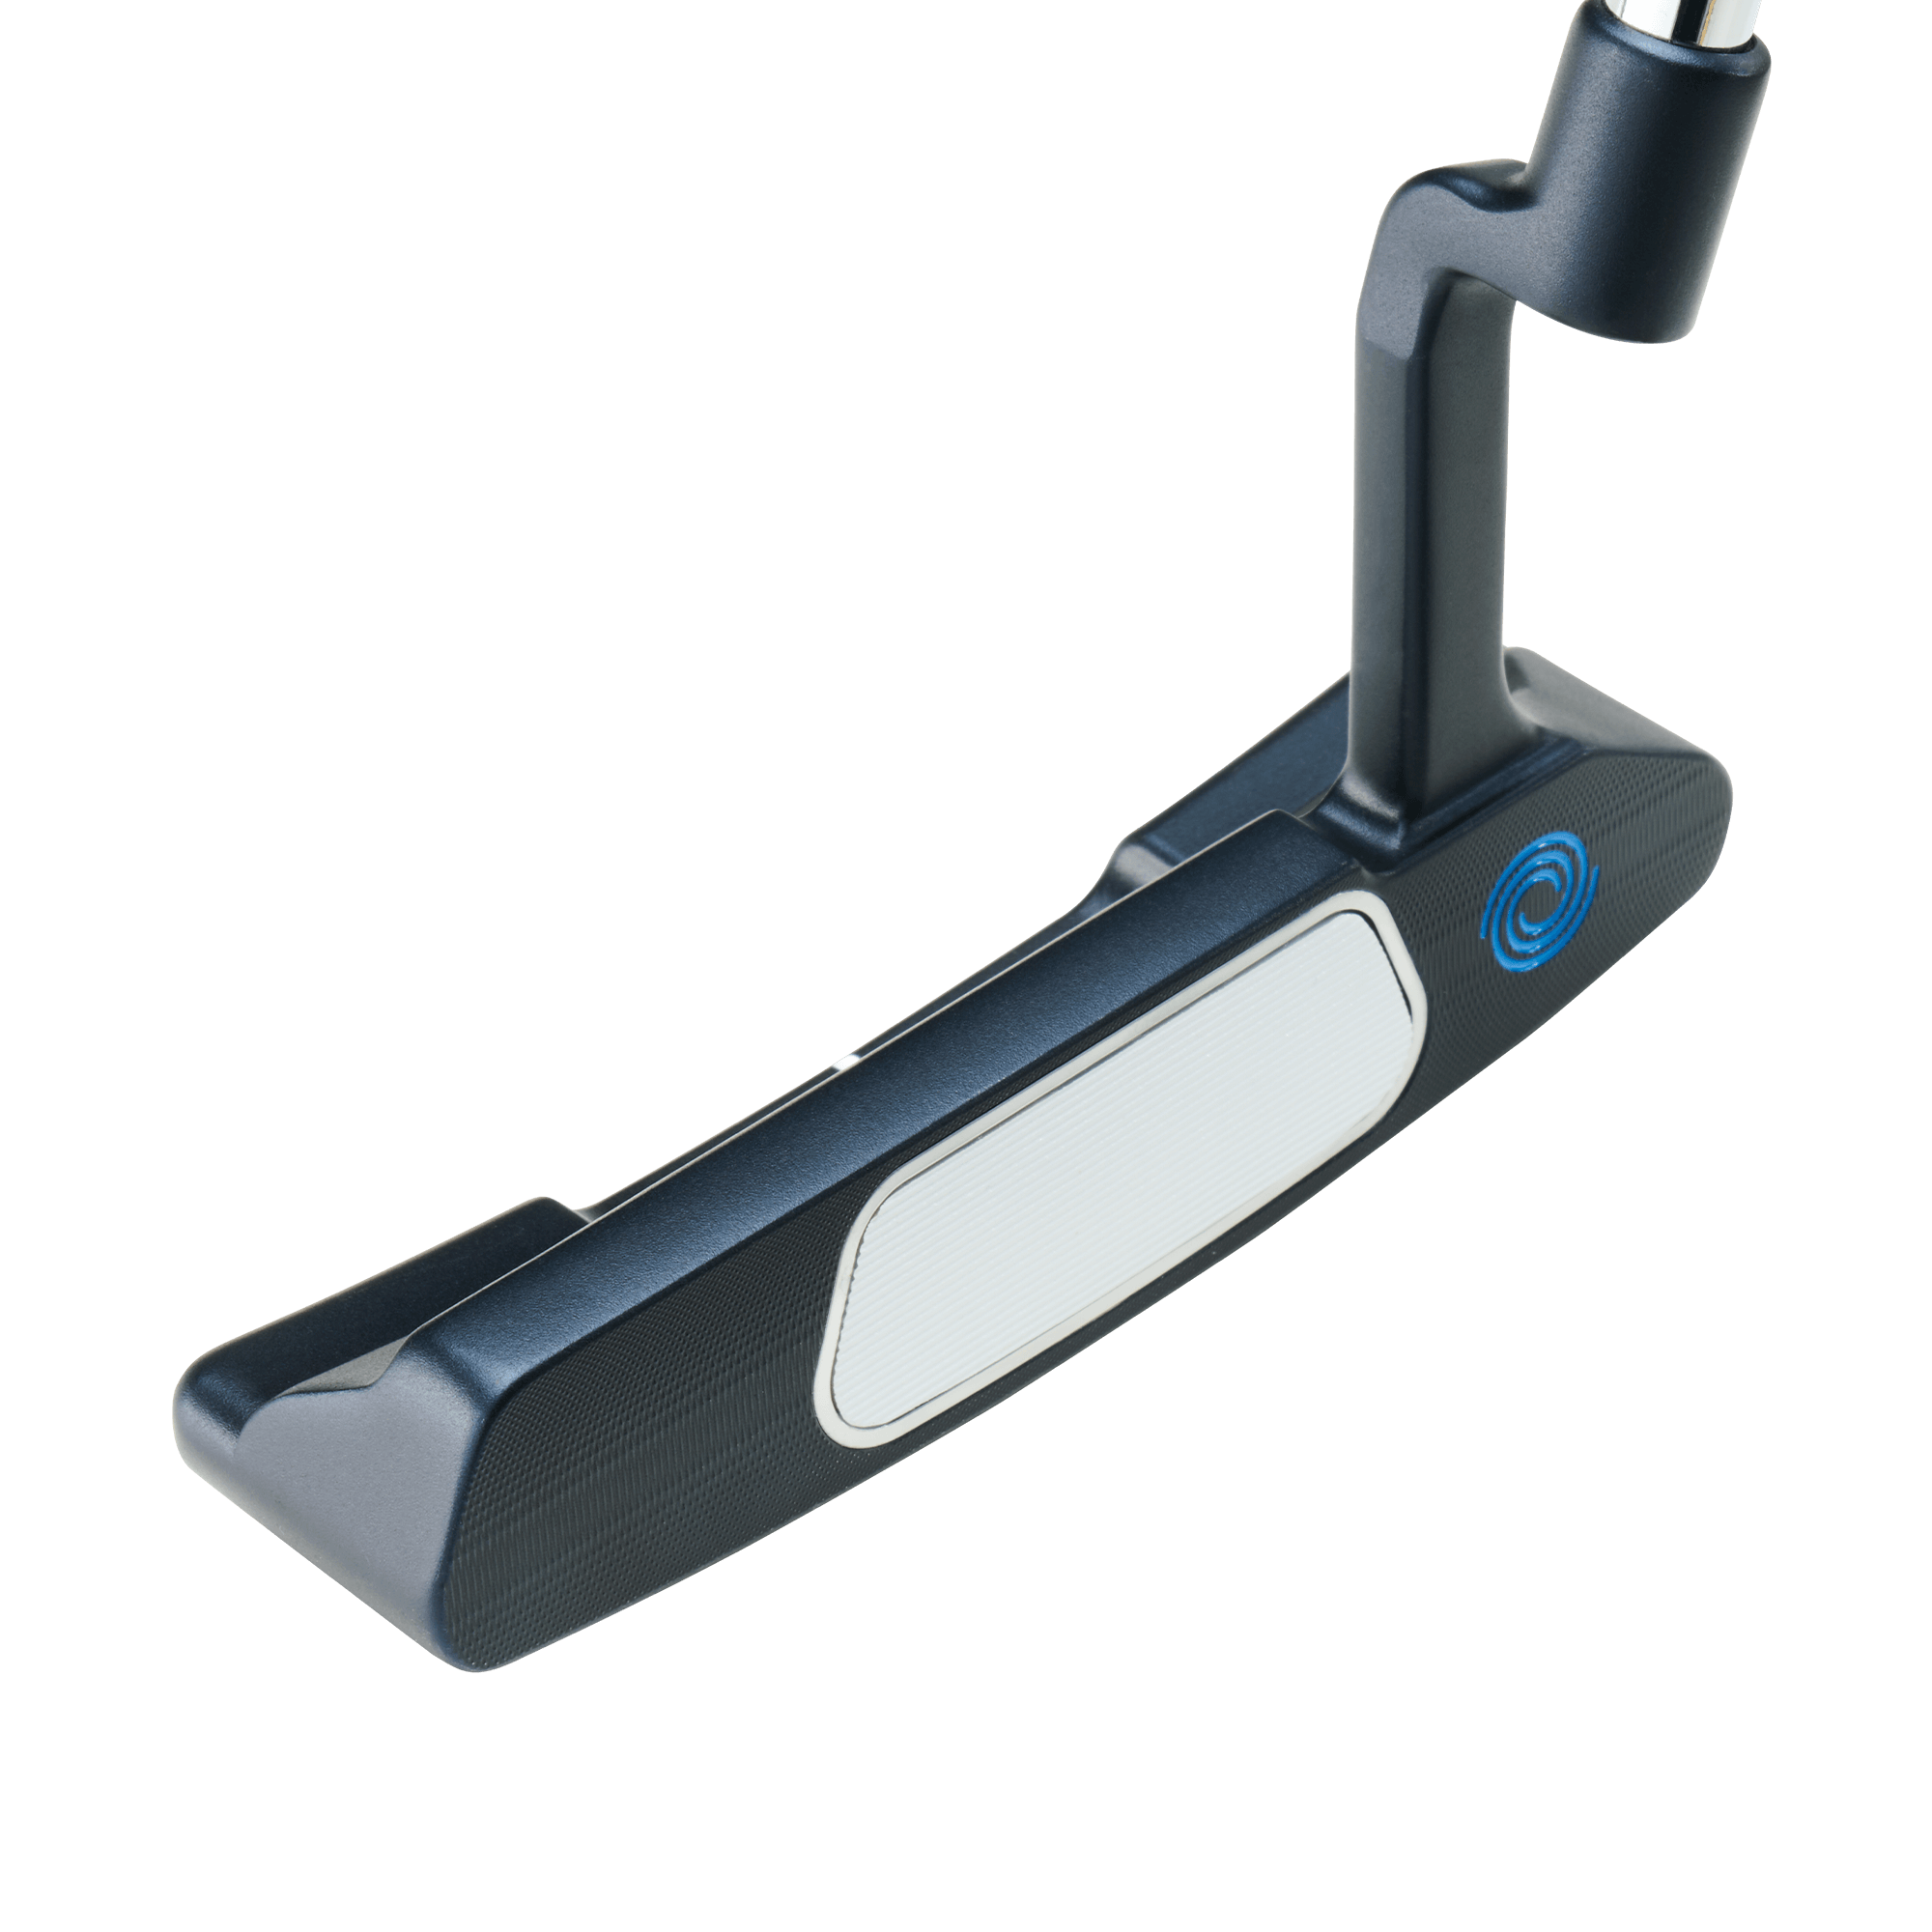 All Ai-ONE Putters